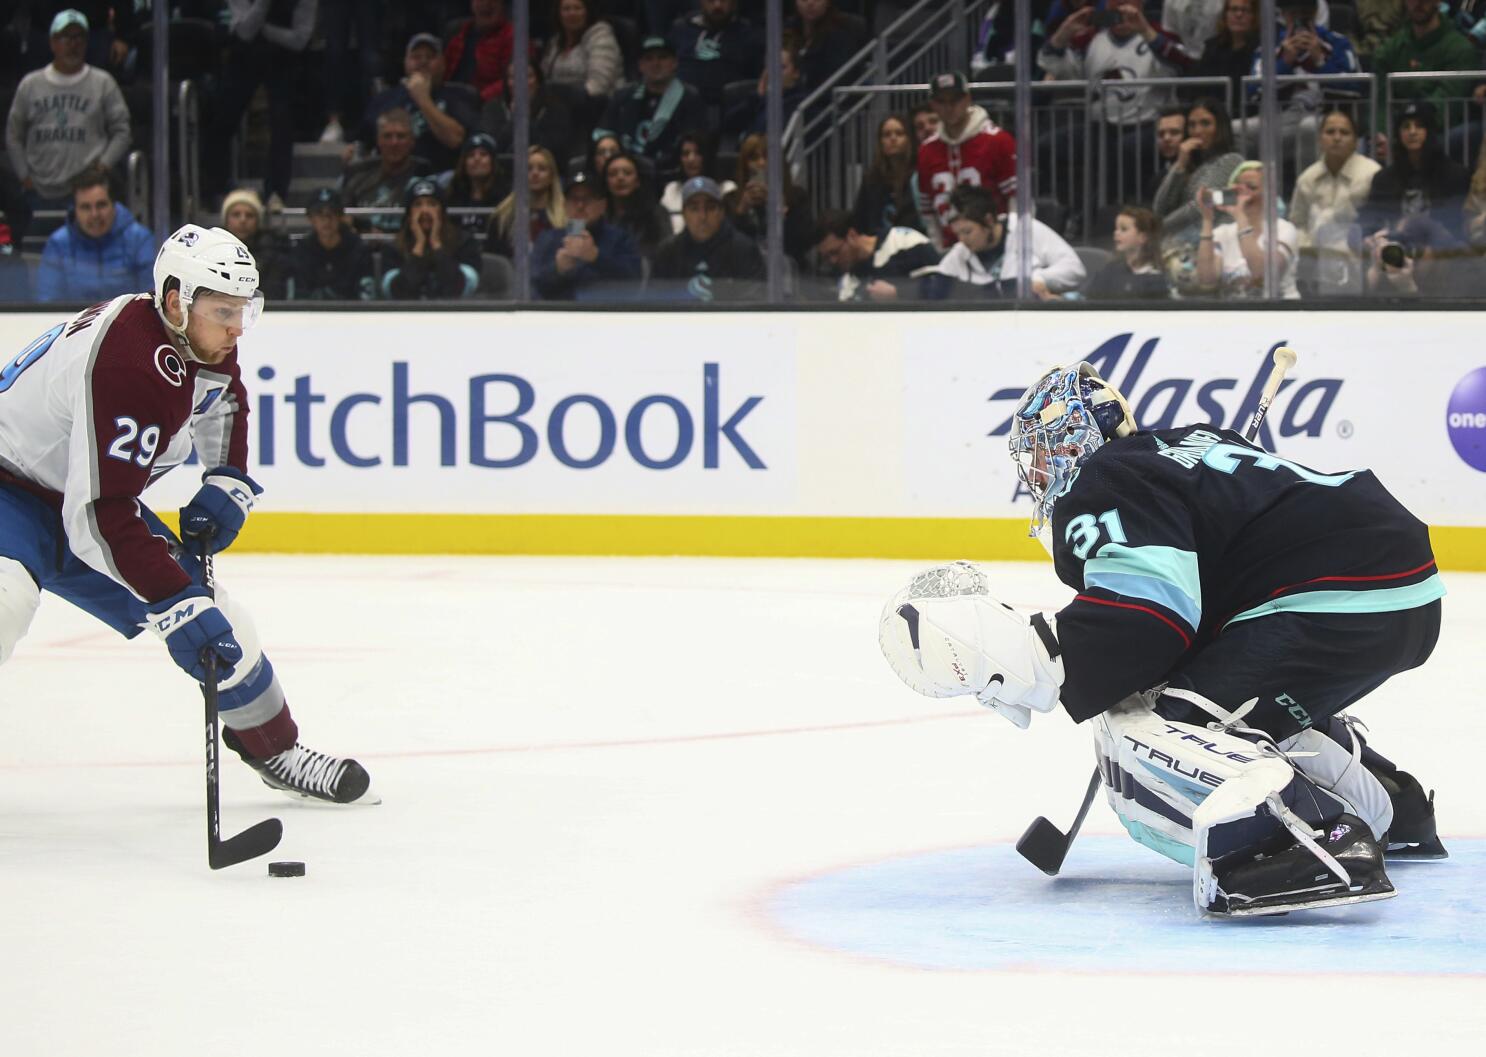 Nathan MacKinnon hat trick clinches division title for Avalanche